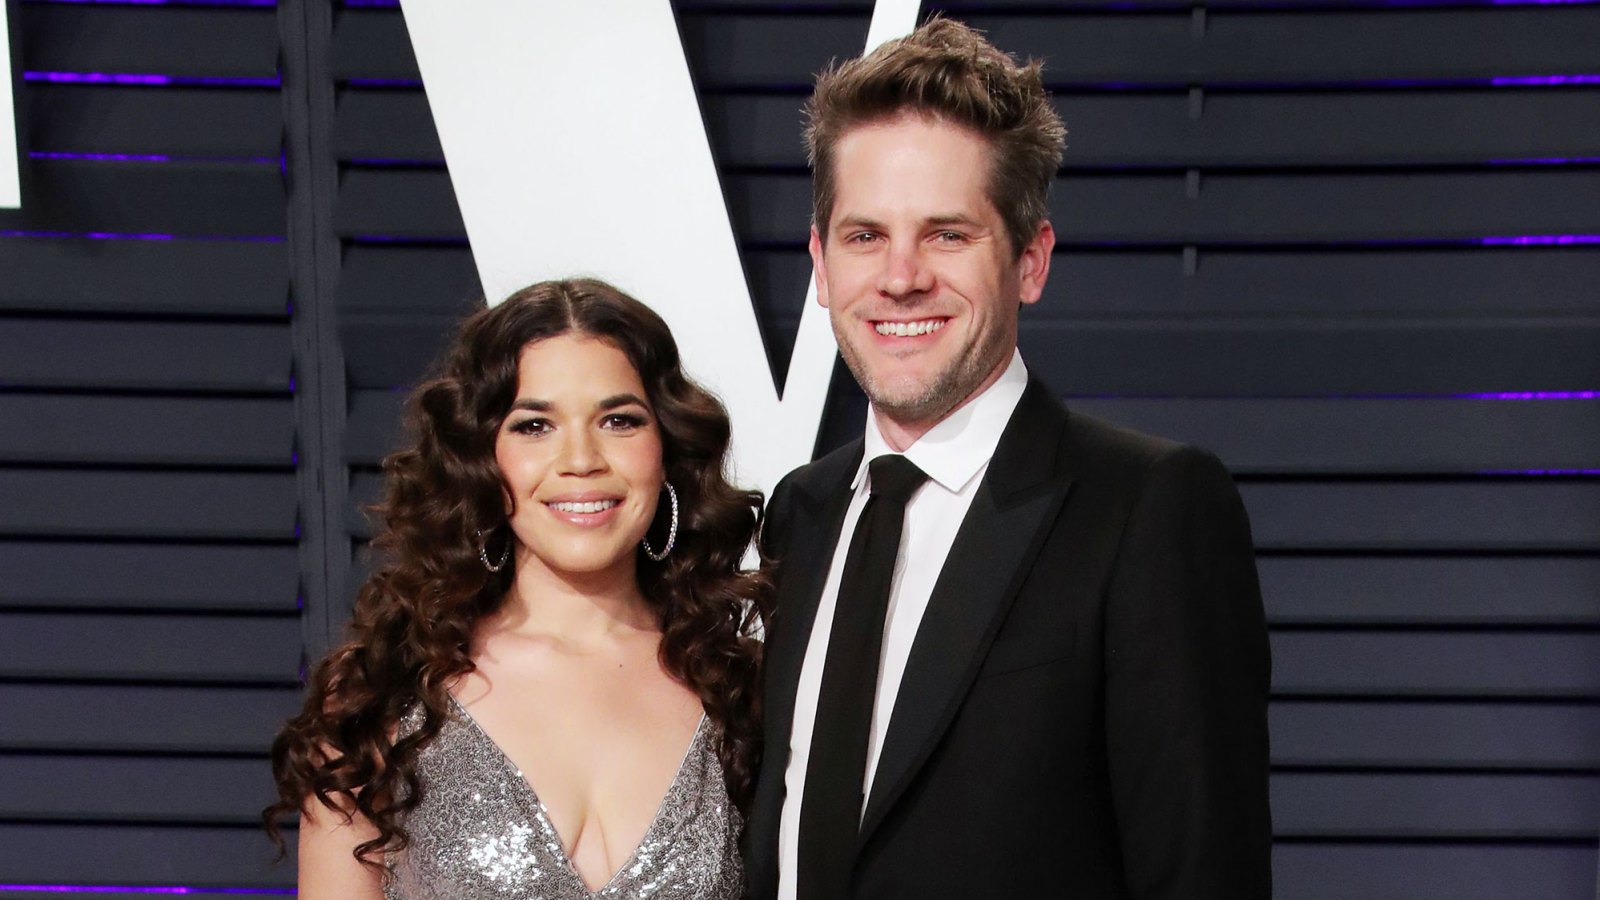 America Ferrera Is Pregnant and Expecting Baby With Husband Ryan Piers Williams